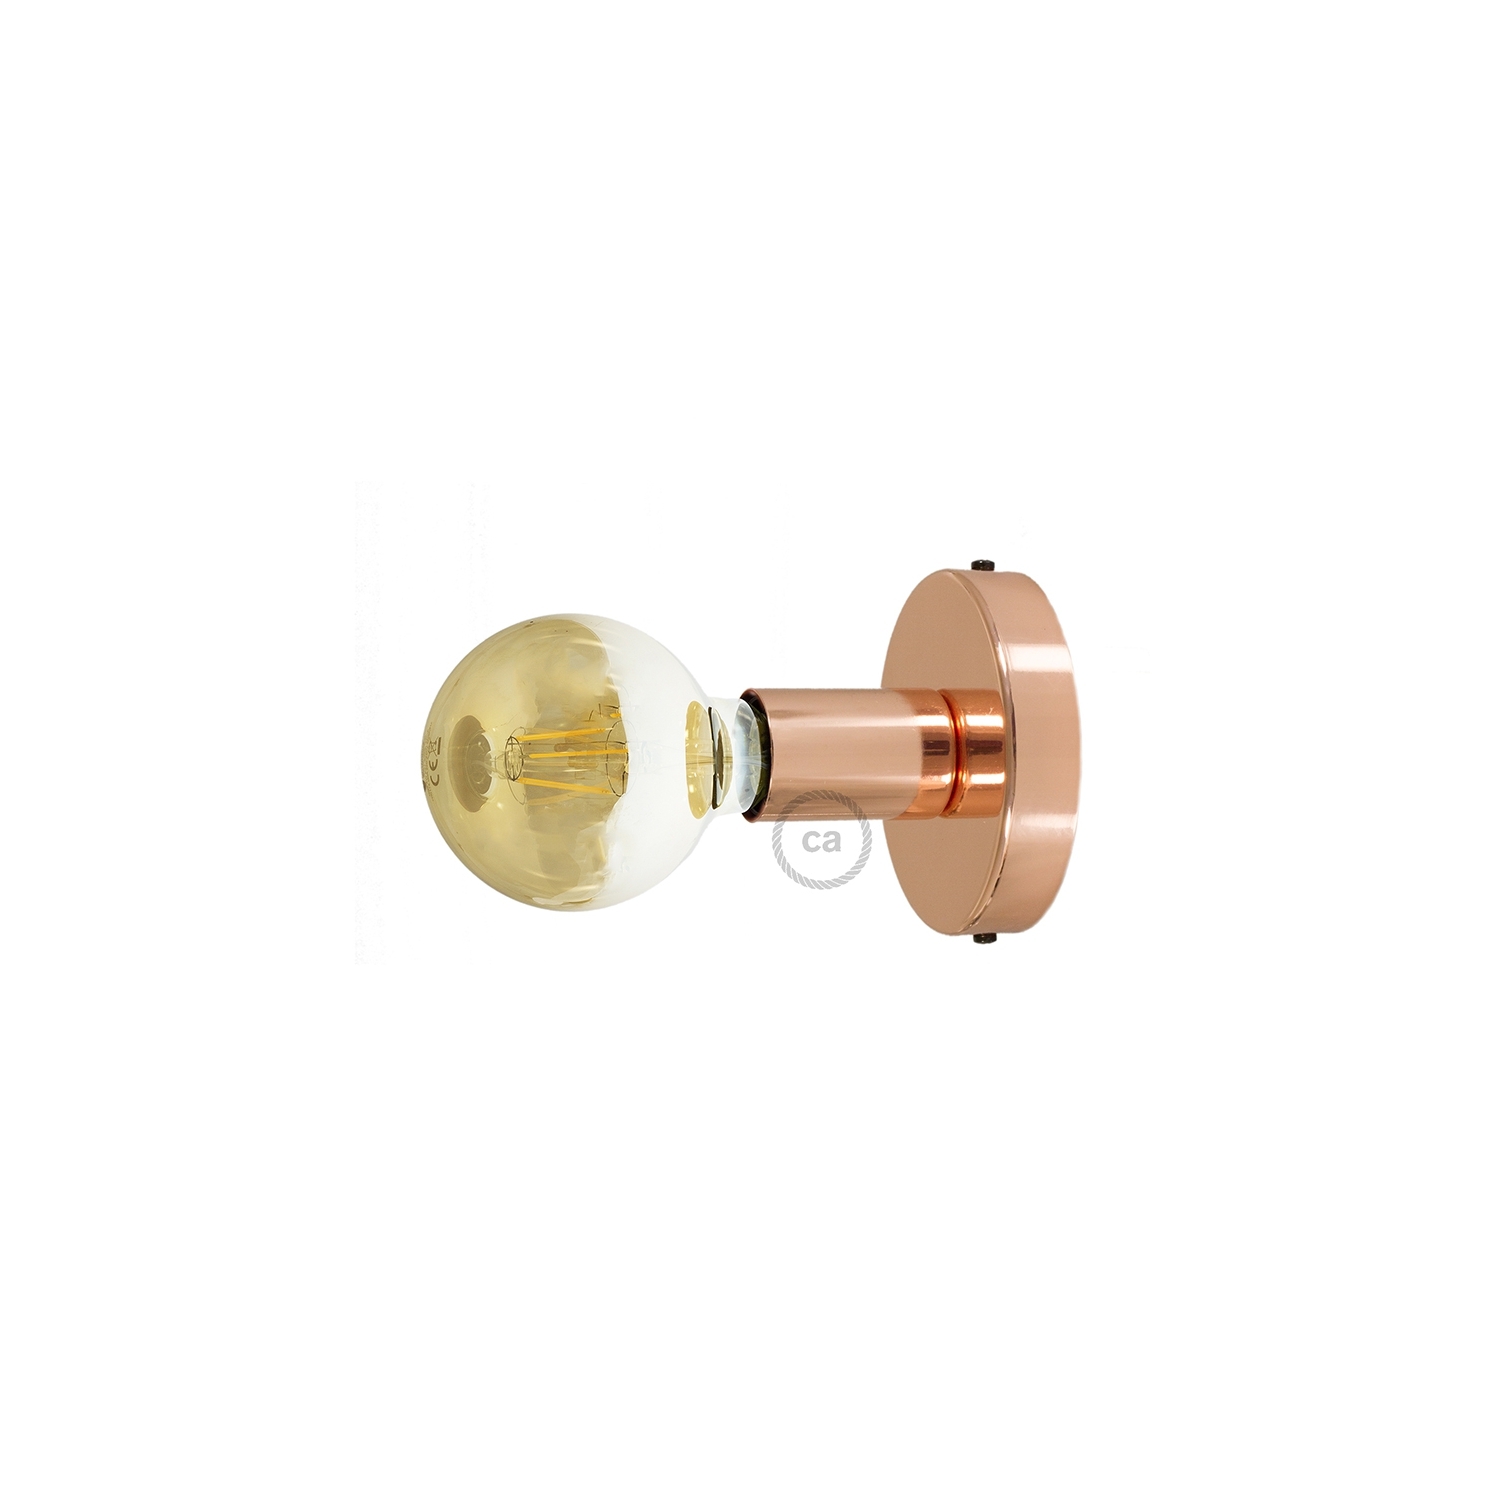 Fermaluce, the coppered metal wall or ceiling light source.